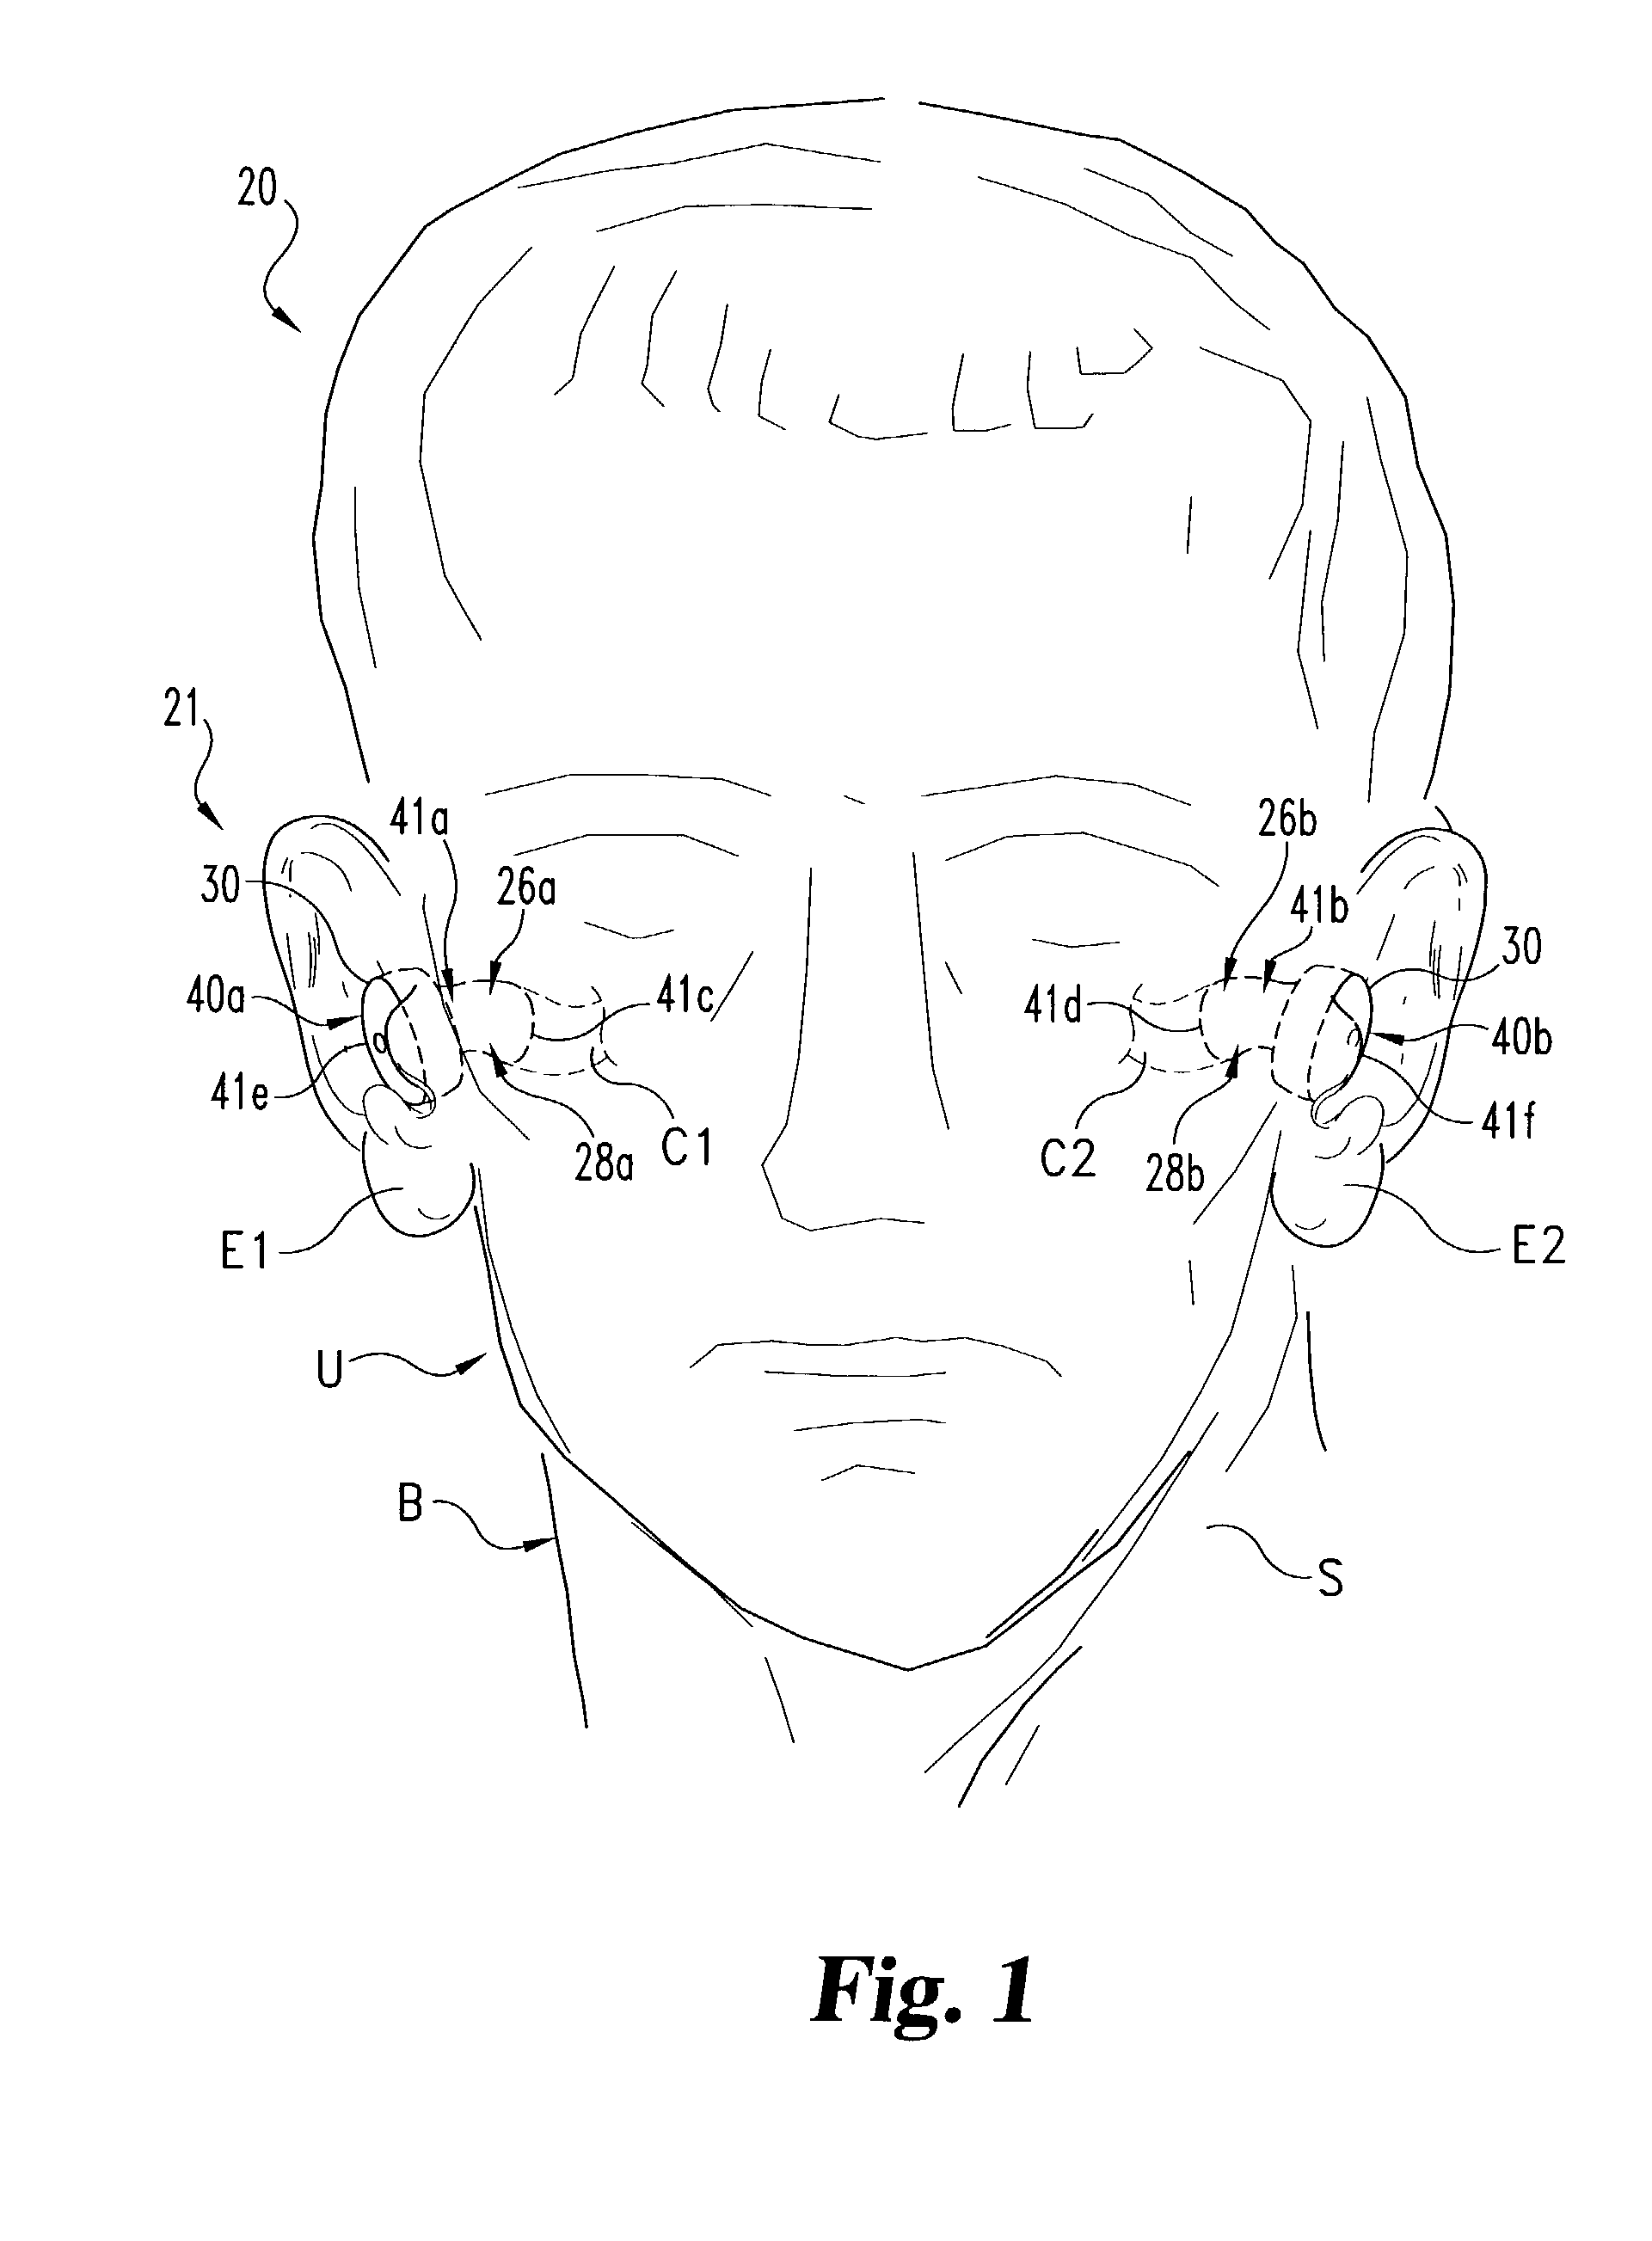 Electrode placement for wireless intrabody communication between components of a hearing system